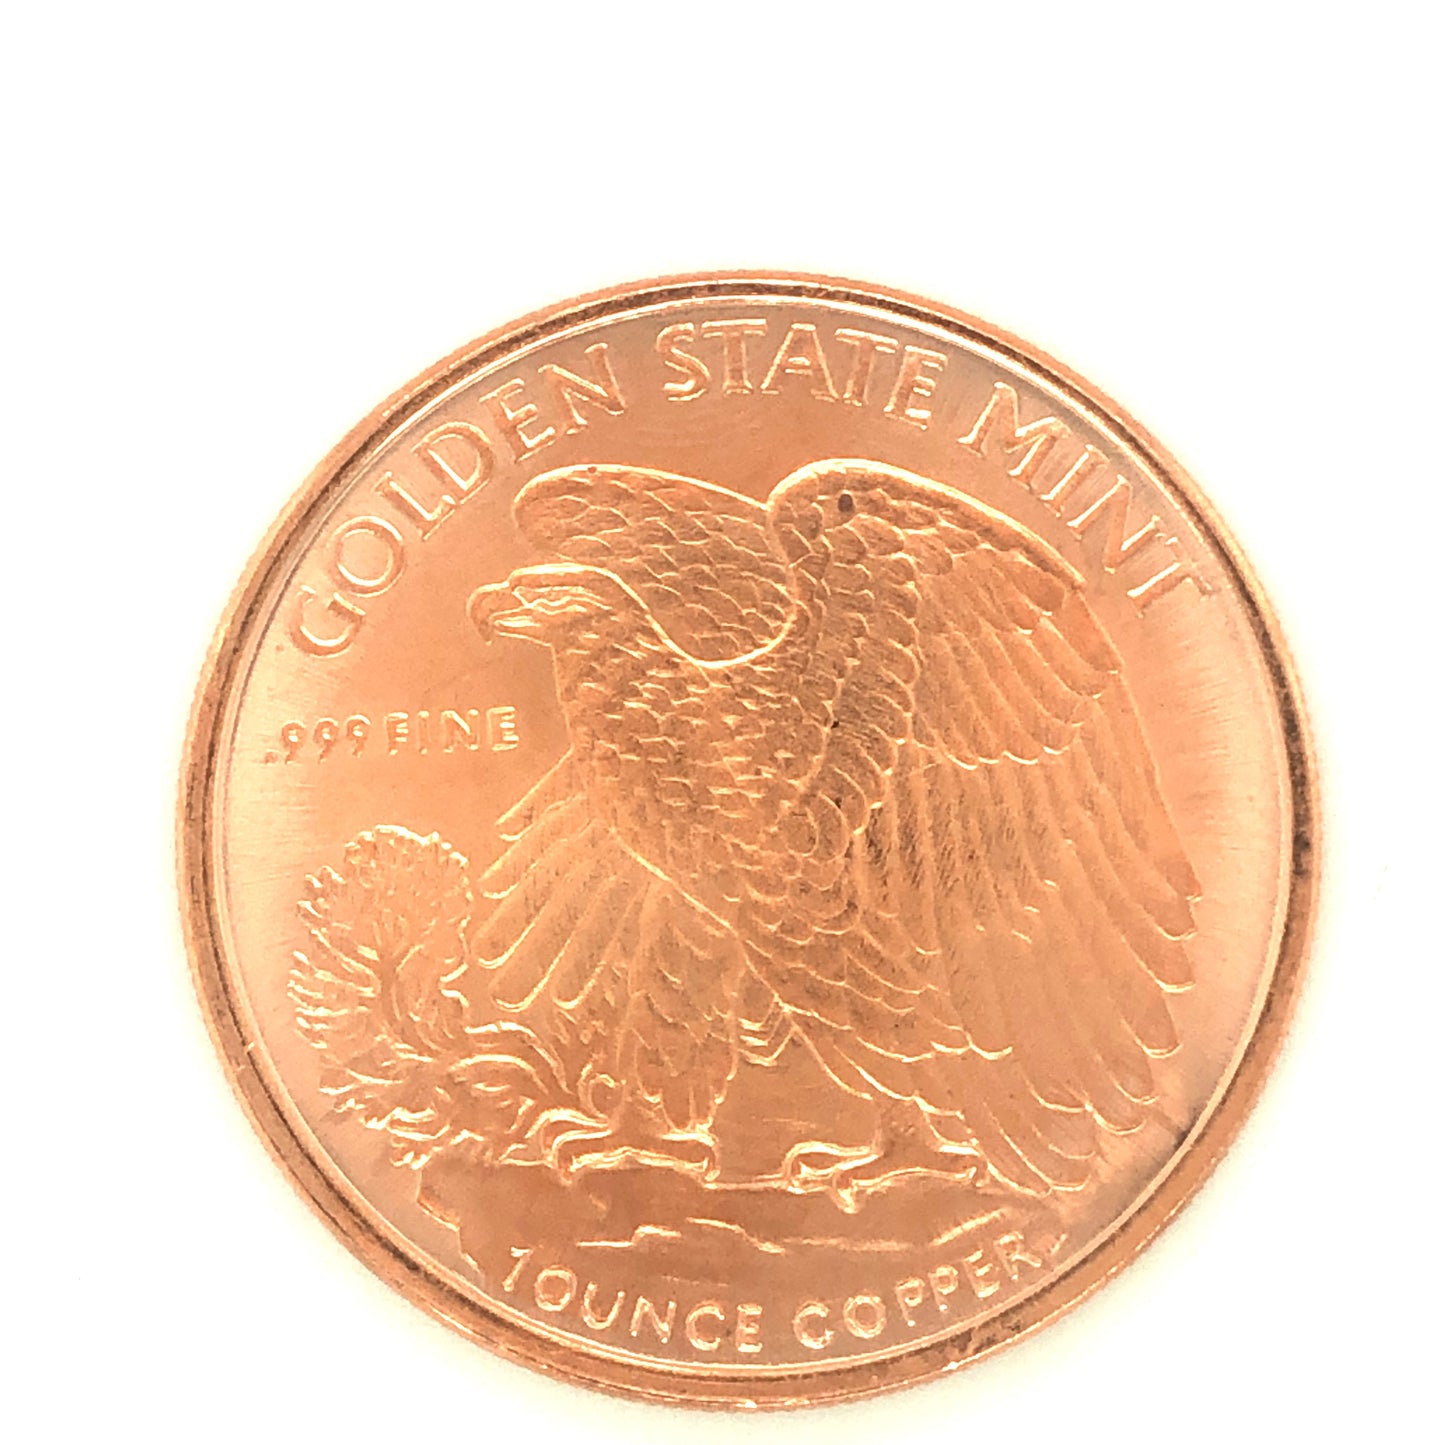 Walking Liberty Golden State Mint 1 oz. .999 Copper Coin